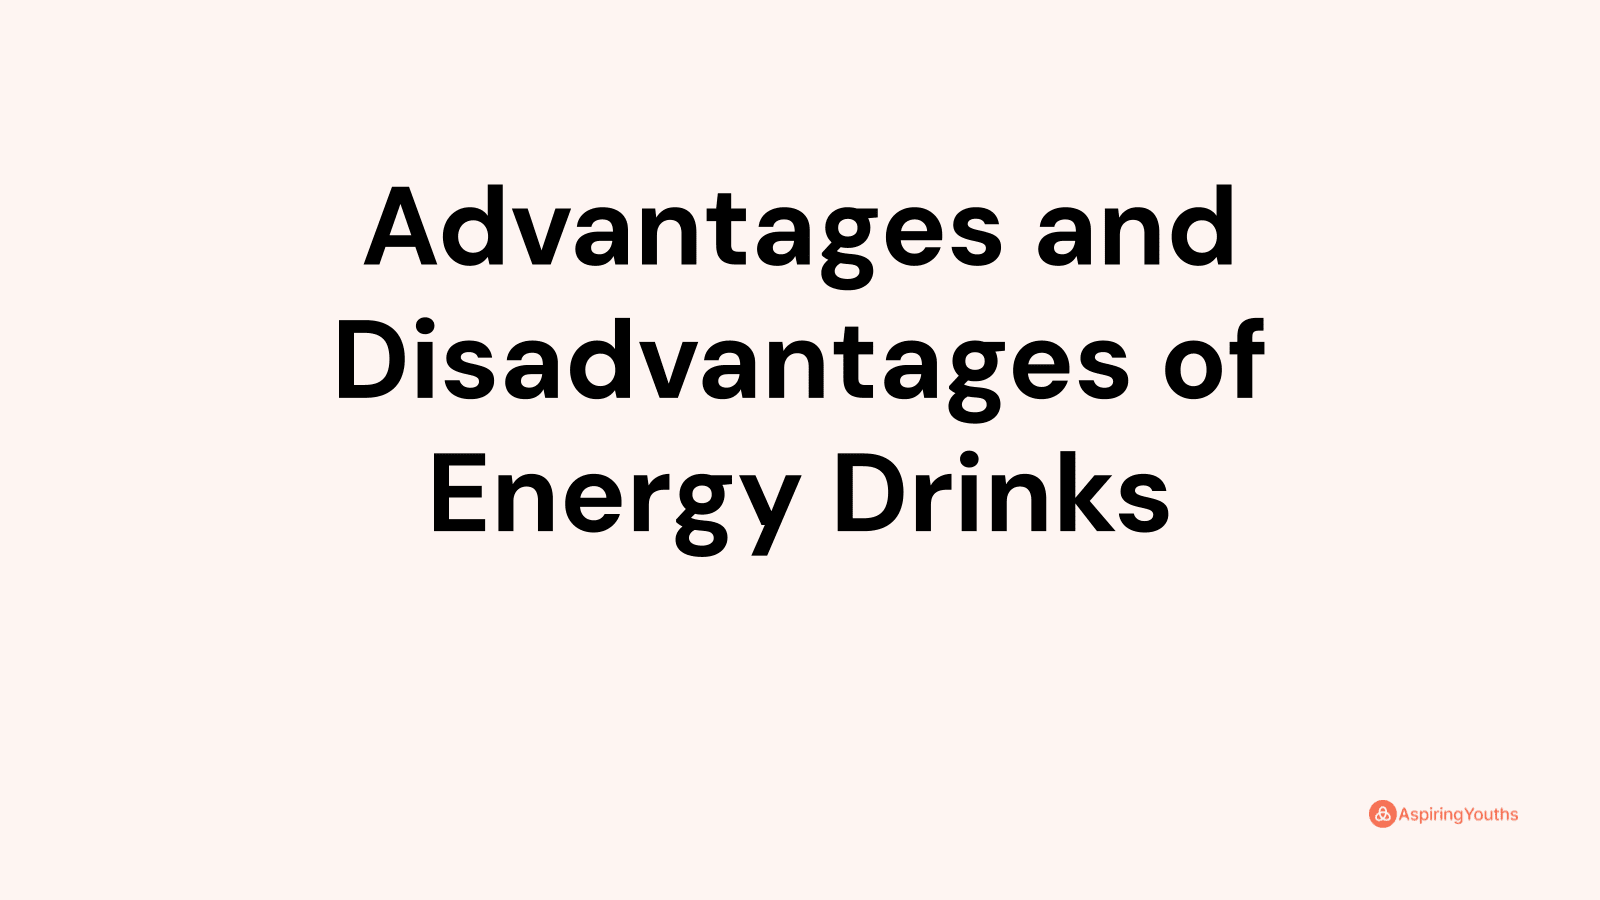 Advantages and Disadvantages of Energy Drinks